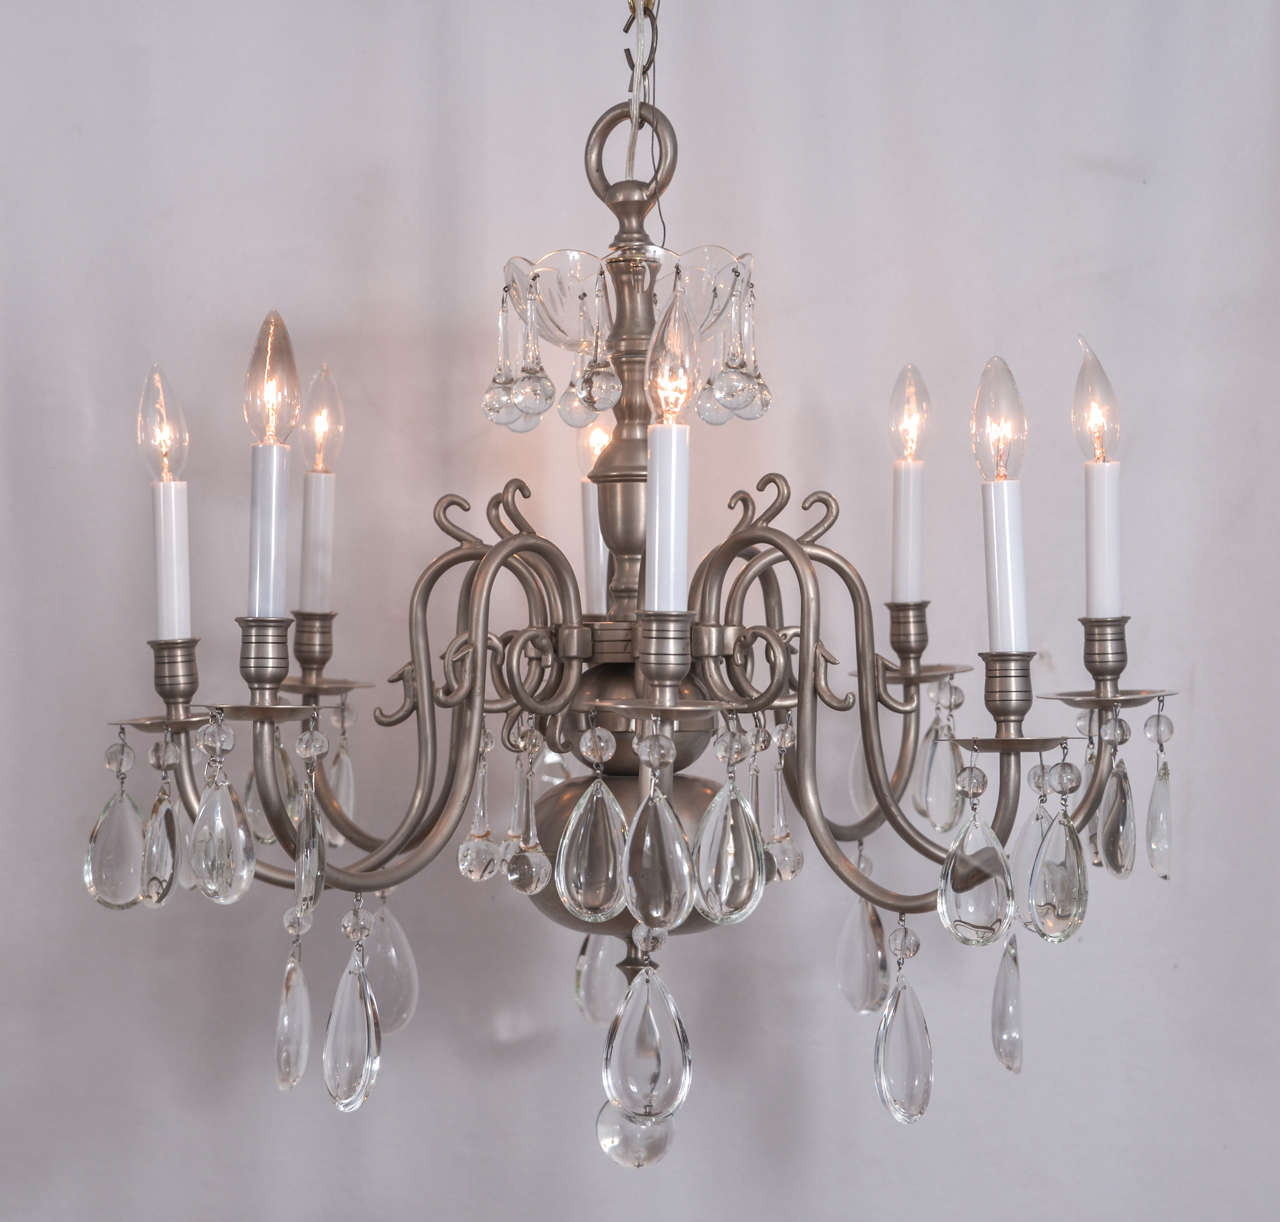 Cast brass with brushed nickel finish Williamsburg style with oyster cut prisms which gives a sense of elegance that is unusual in a Williamsburg chandelier.
The initial height of this fixture is 25